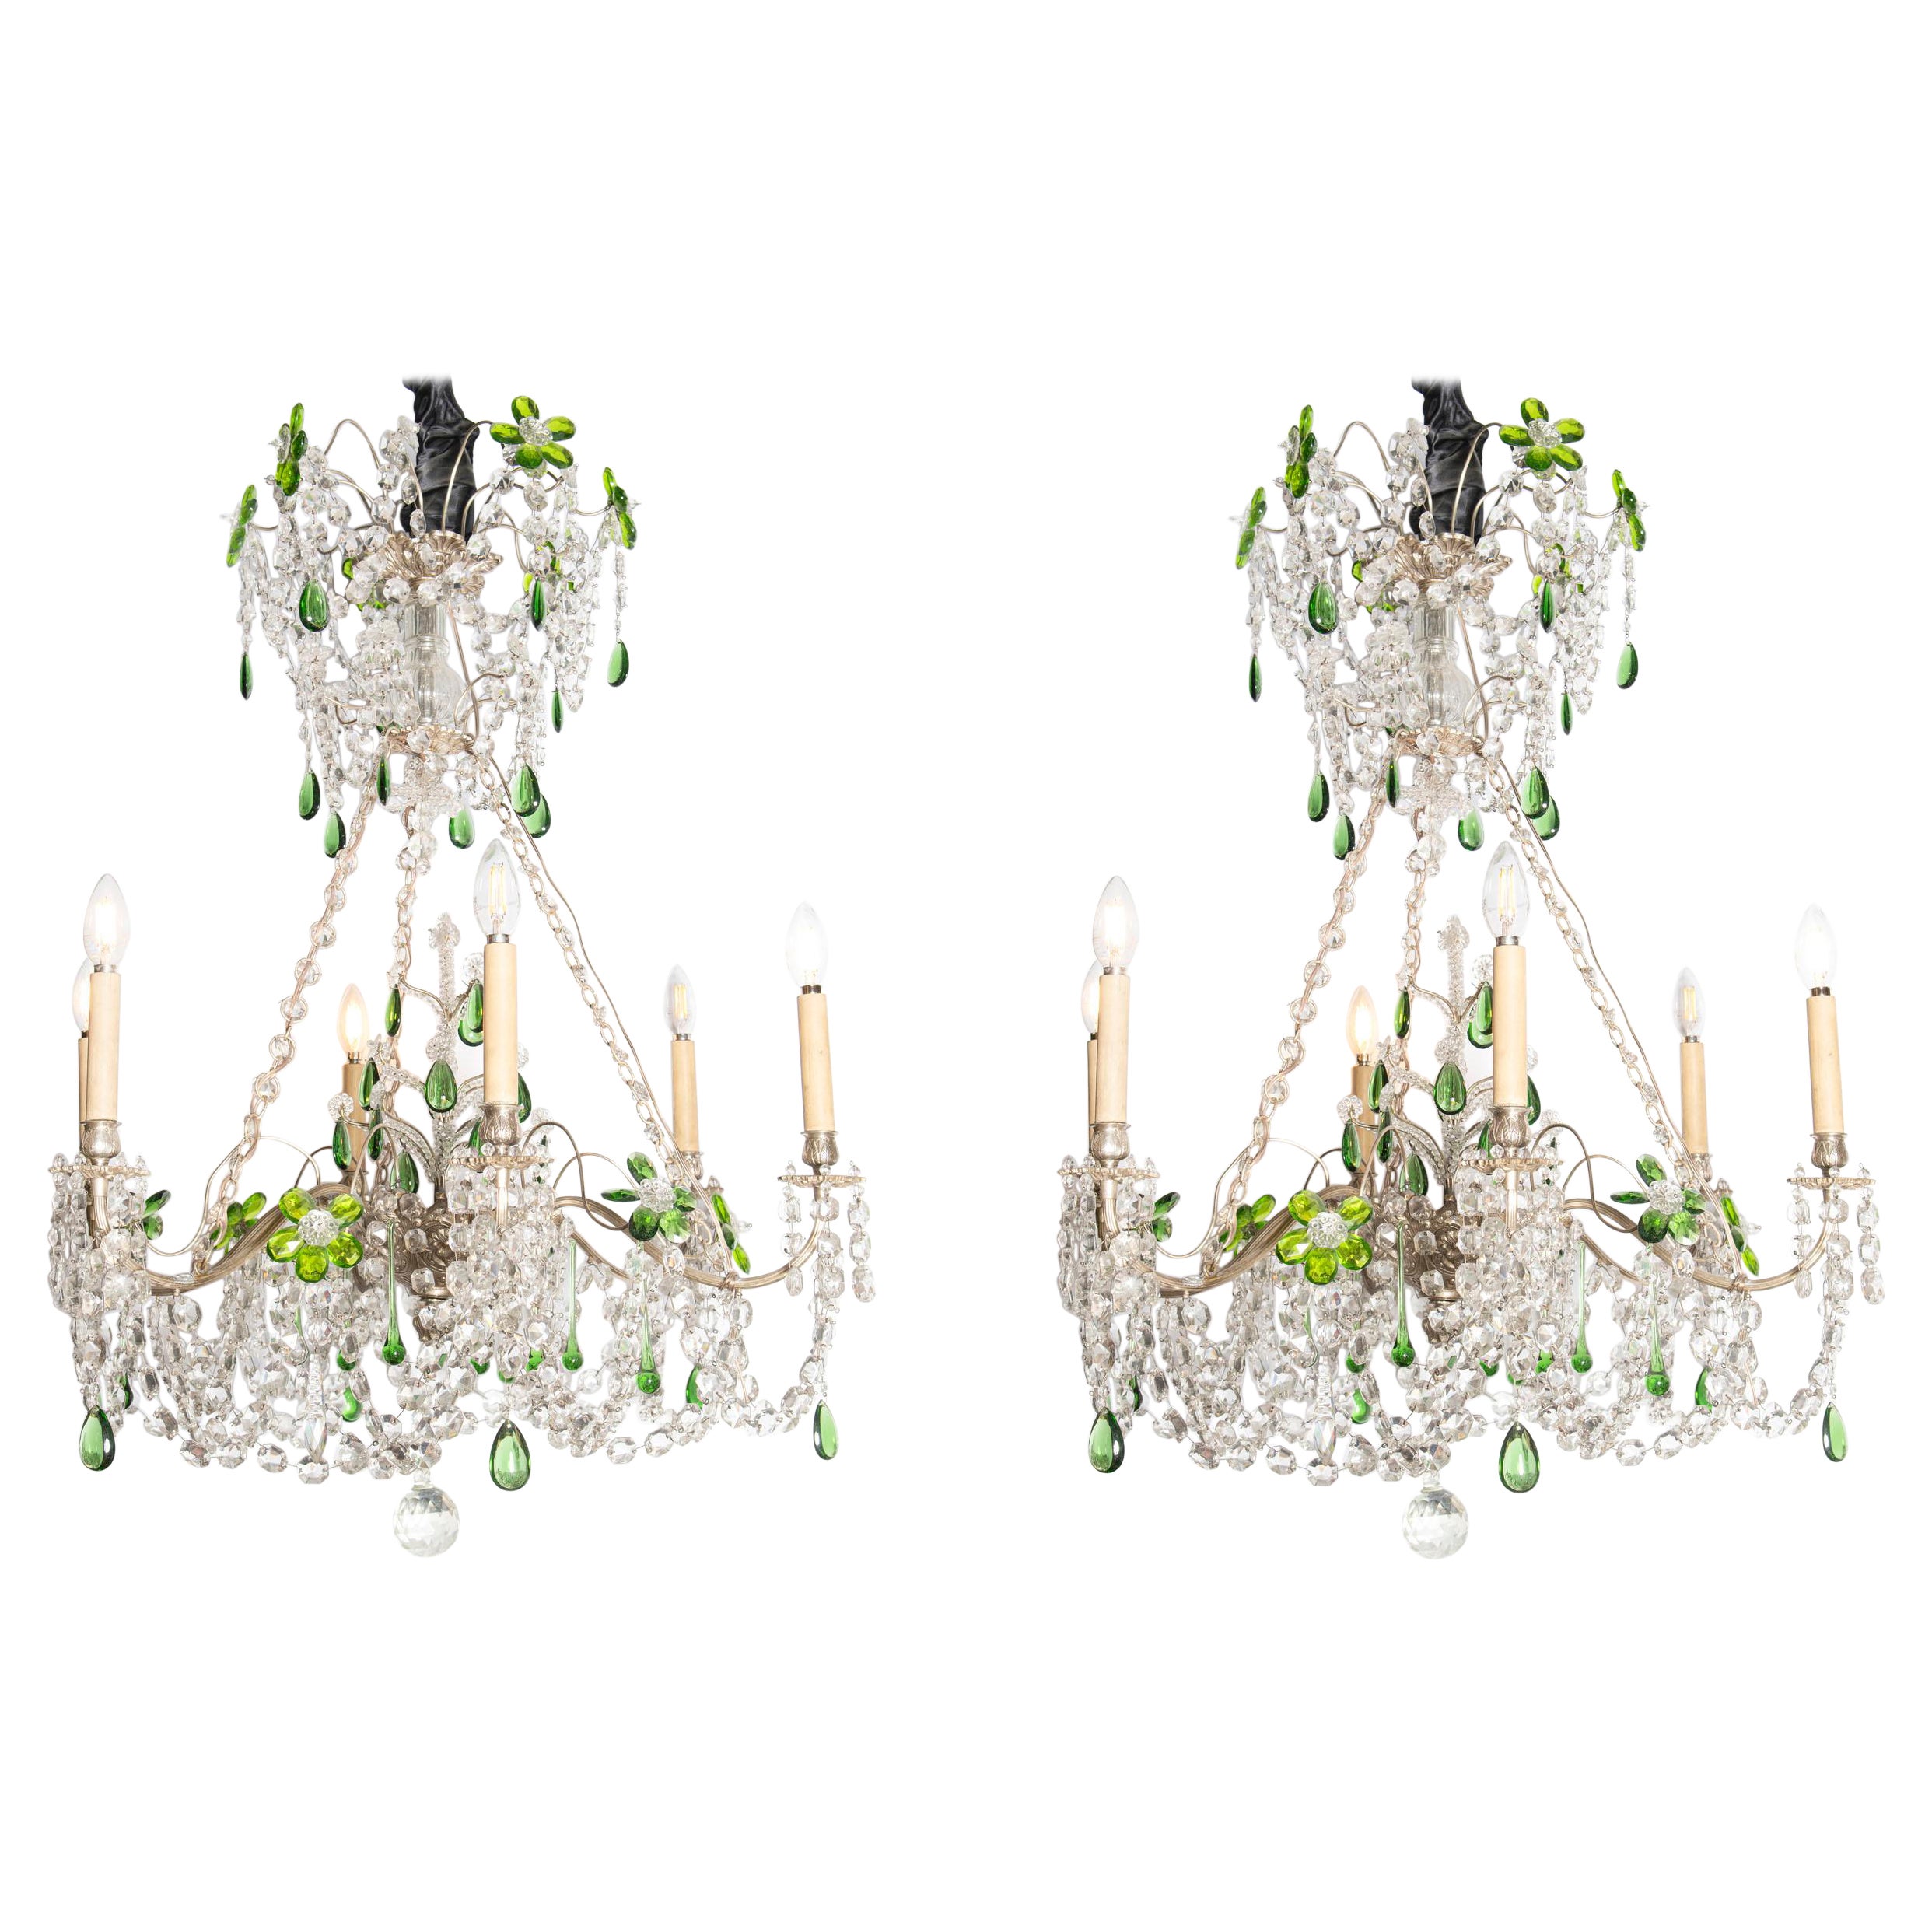 Pair of Chezh Crystal and Silver Bronze Chandeliers, England, Early 20th Century For Sale